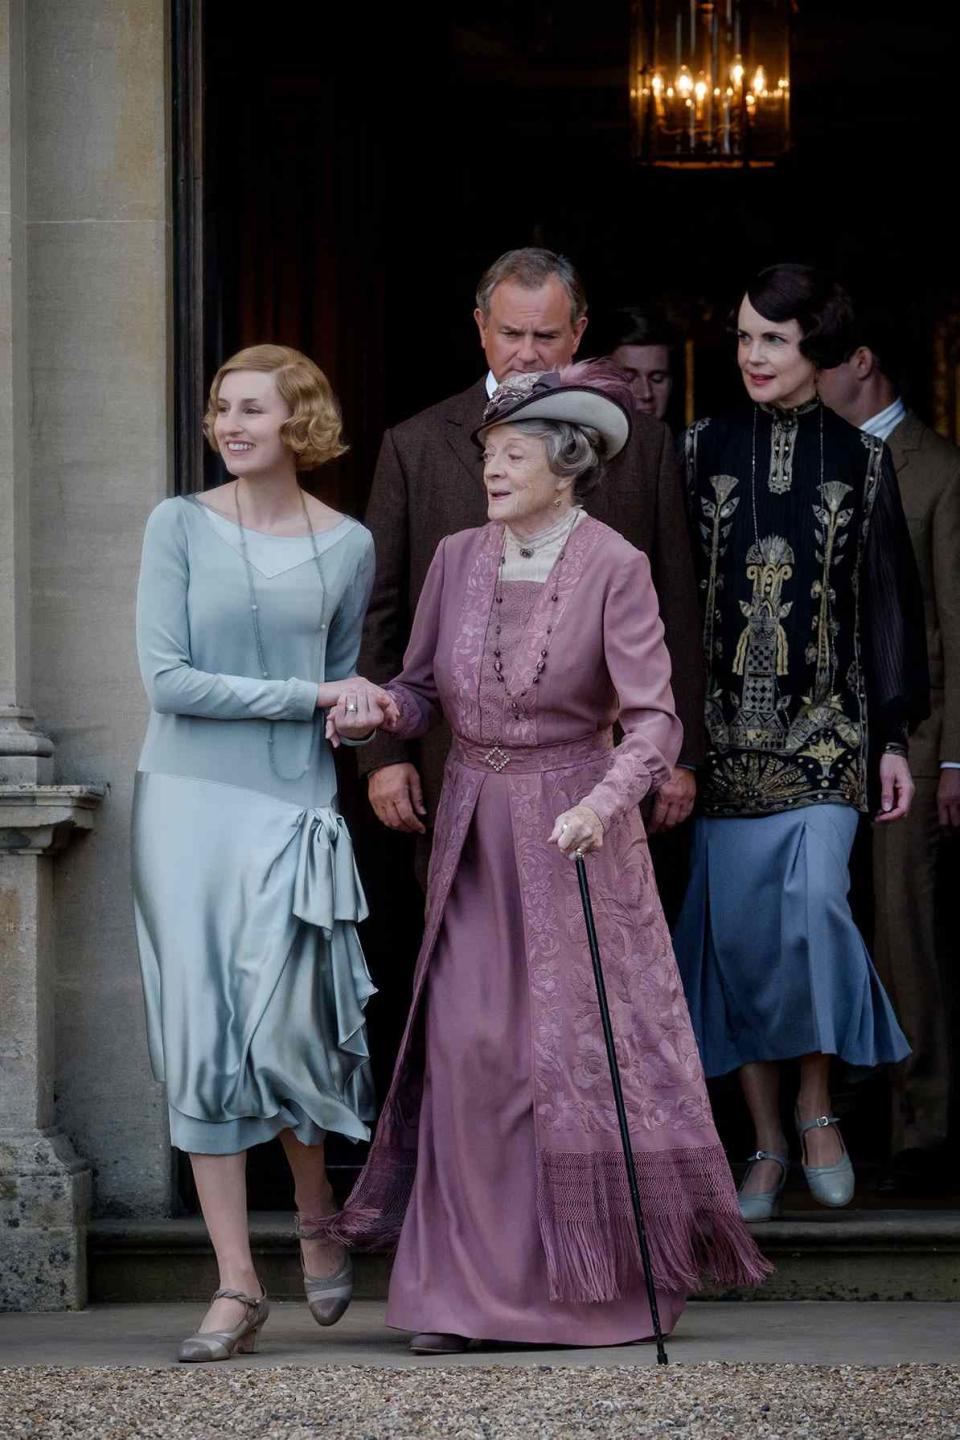 Cast of Downton Abbey exiting a building